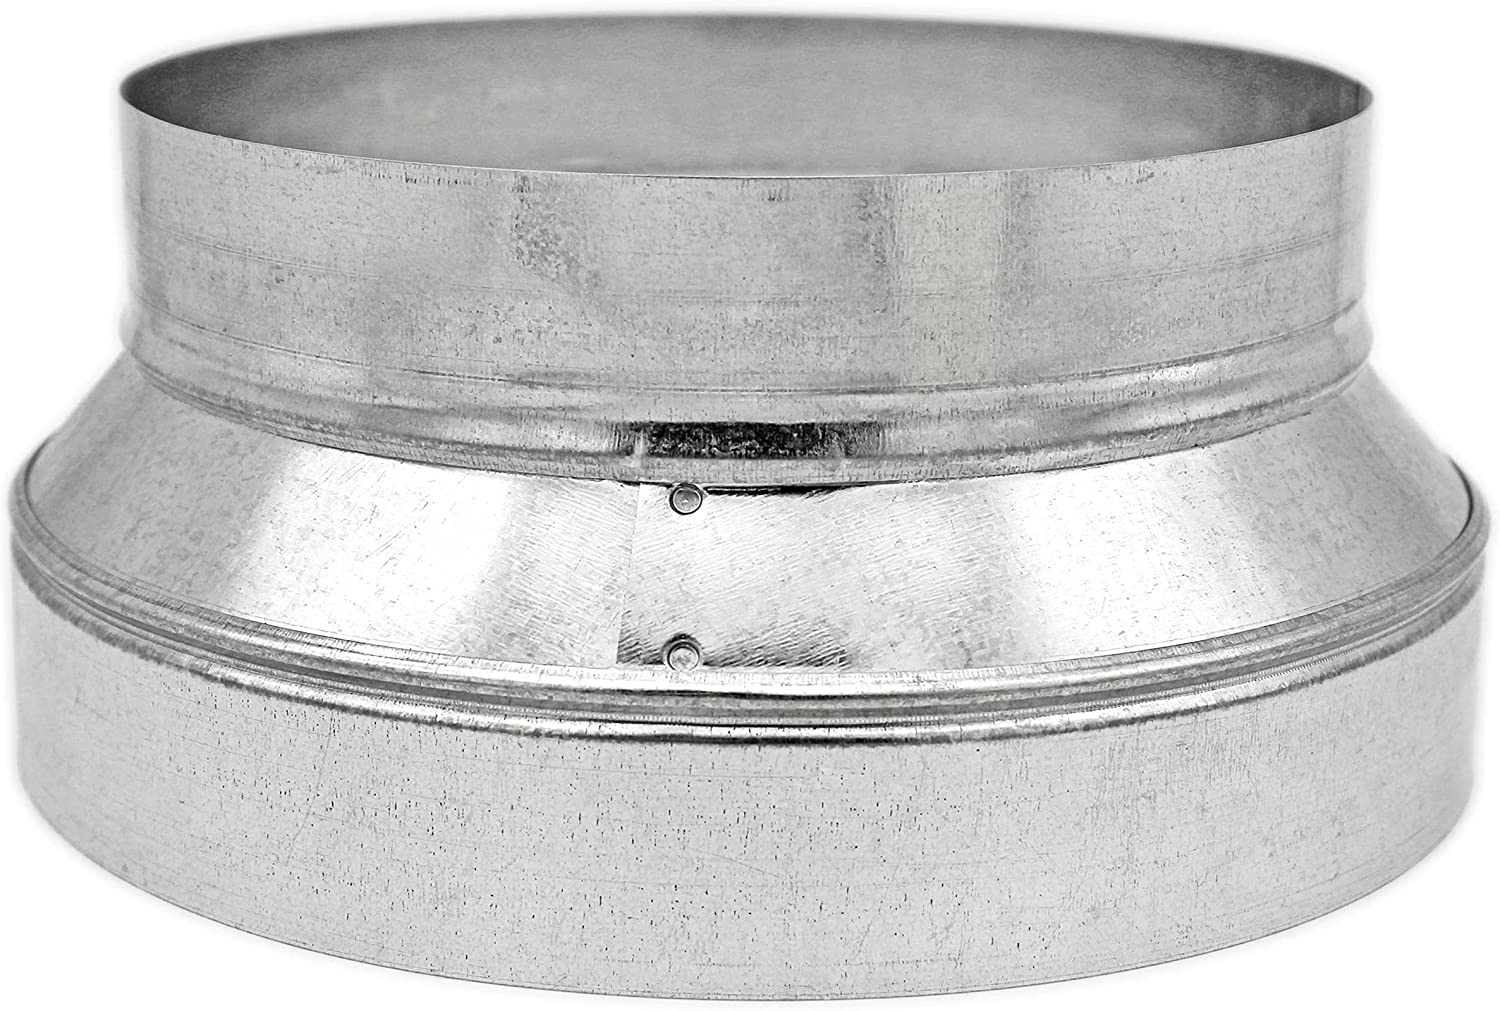 HVAC Premium Round Metal Pipe Reducer & Increaser | 12" to 6" HVAC Duct Reducer or Increaser 30g Gauge | Galvanized Sheet Metal Ducting Connector is Compatible with Duct 6"